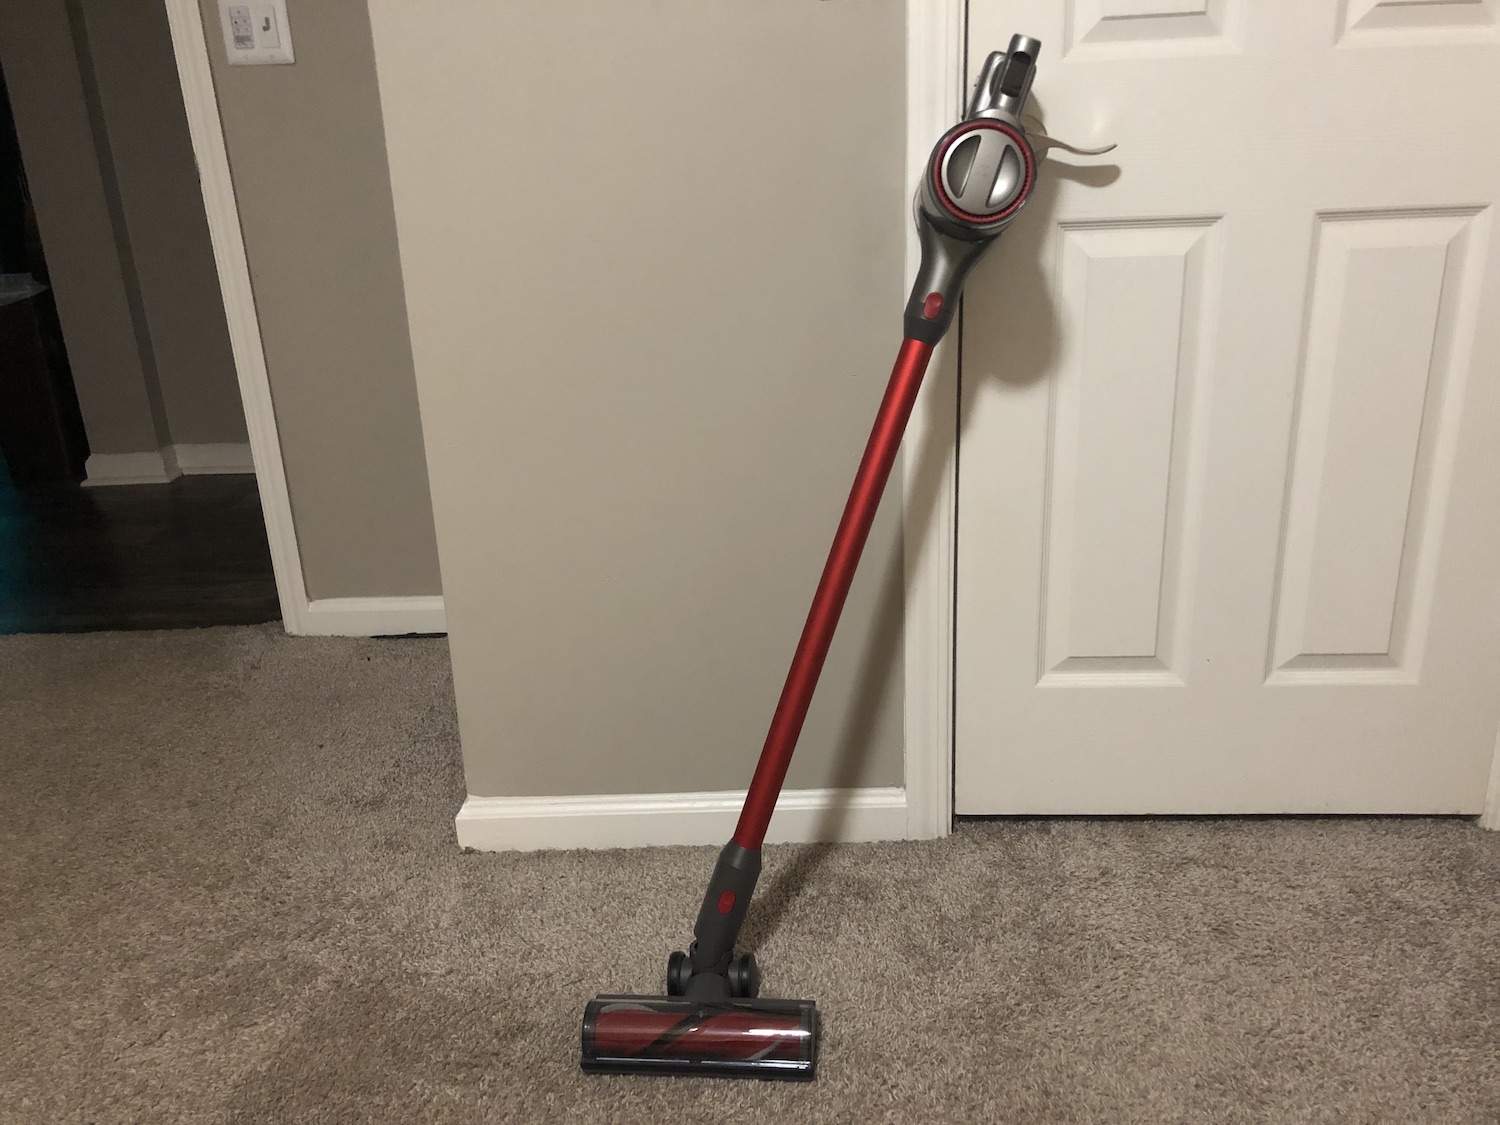  roborock H7 Cordless Stick Vacuum Cleaner, 3 Cleaning